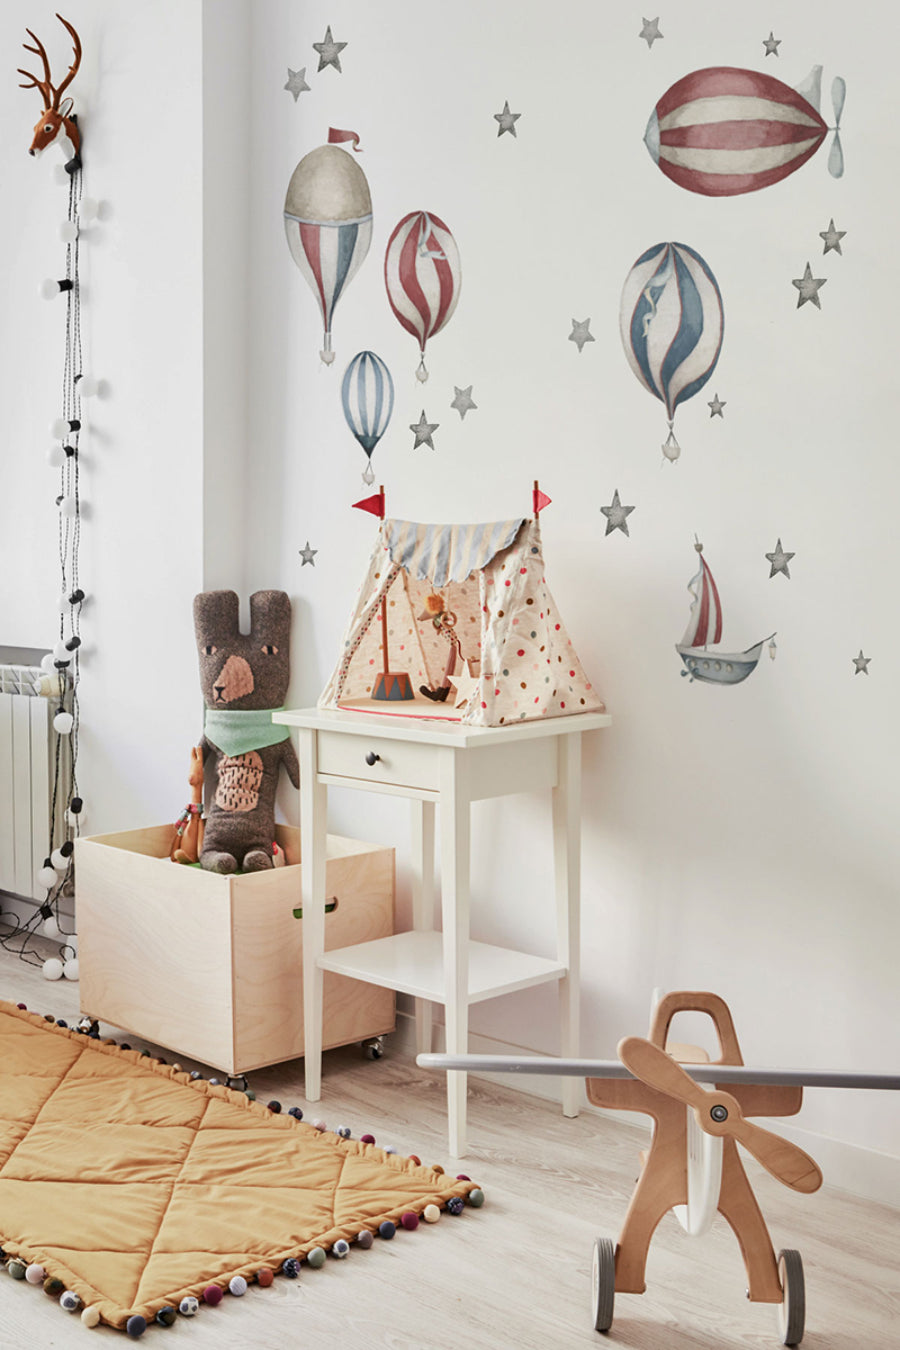 SKY Is The Limit Set Wall Sticker